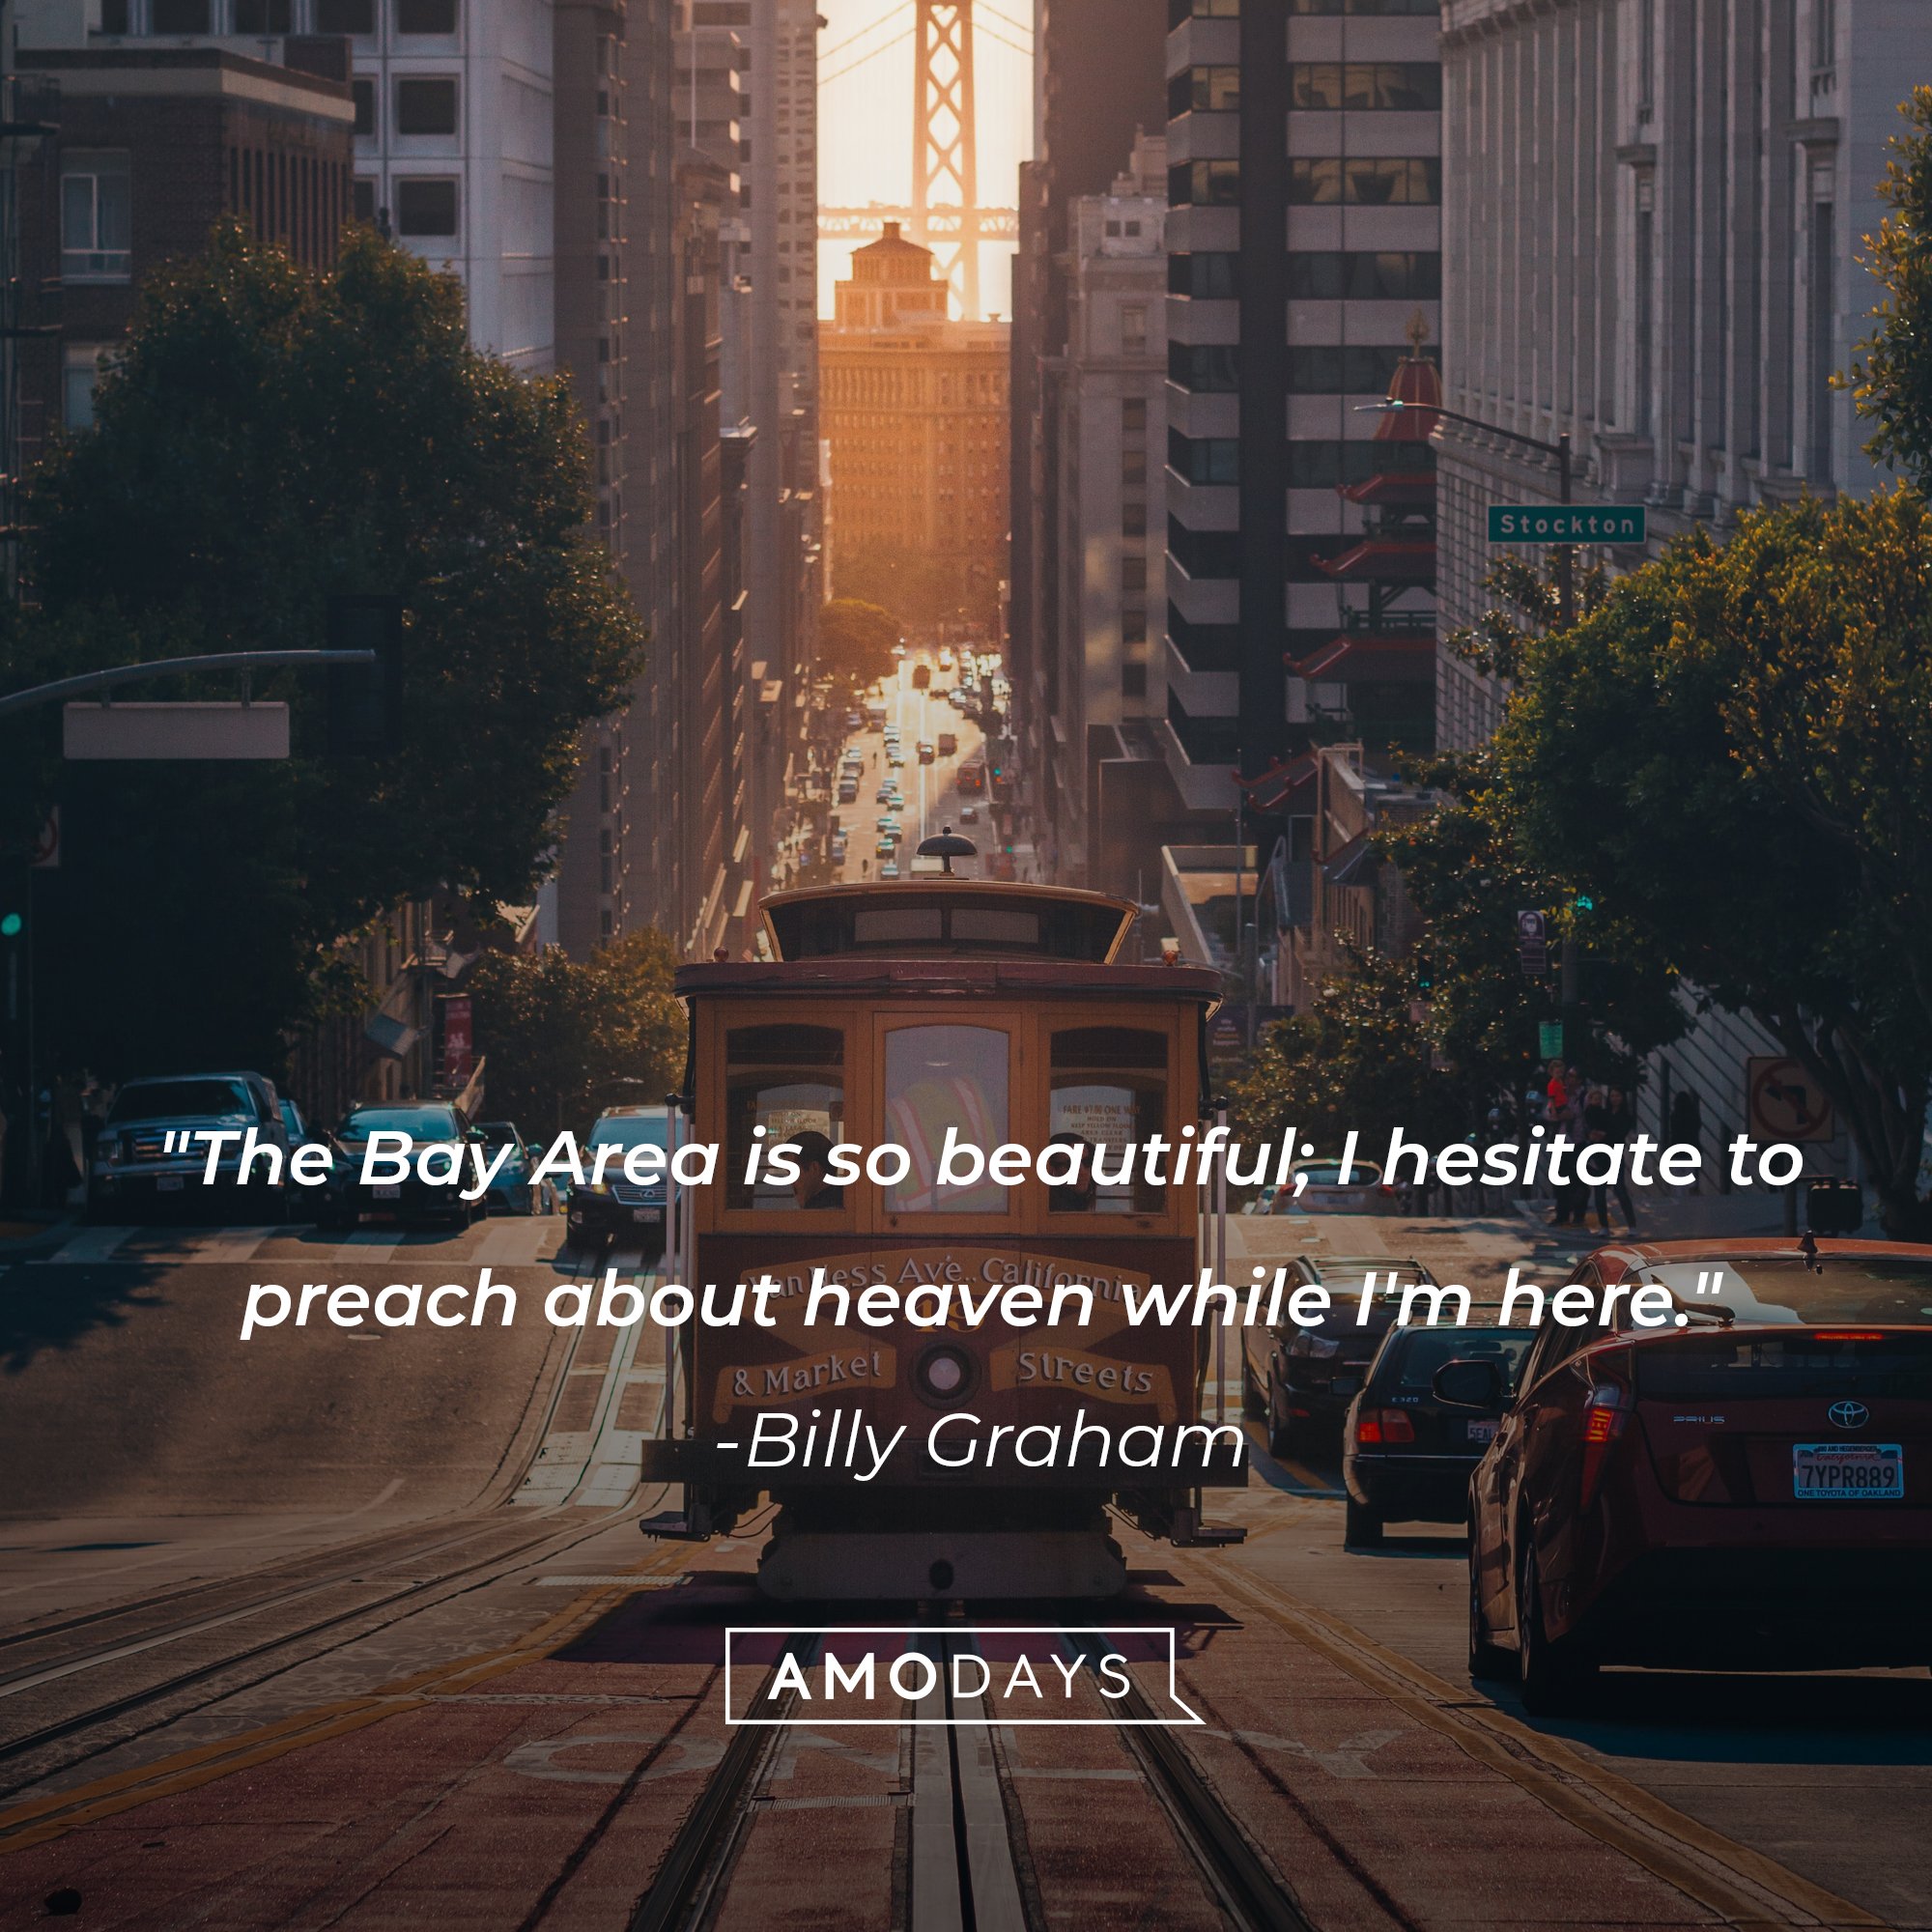 Billy Graham’s quote: "The Bay Area is so beautiful; I hesitate to preach about heaven while I'm here." | Image: AmoDays